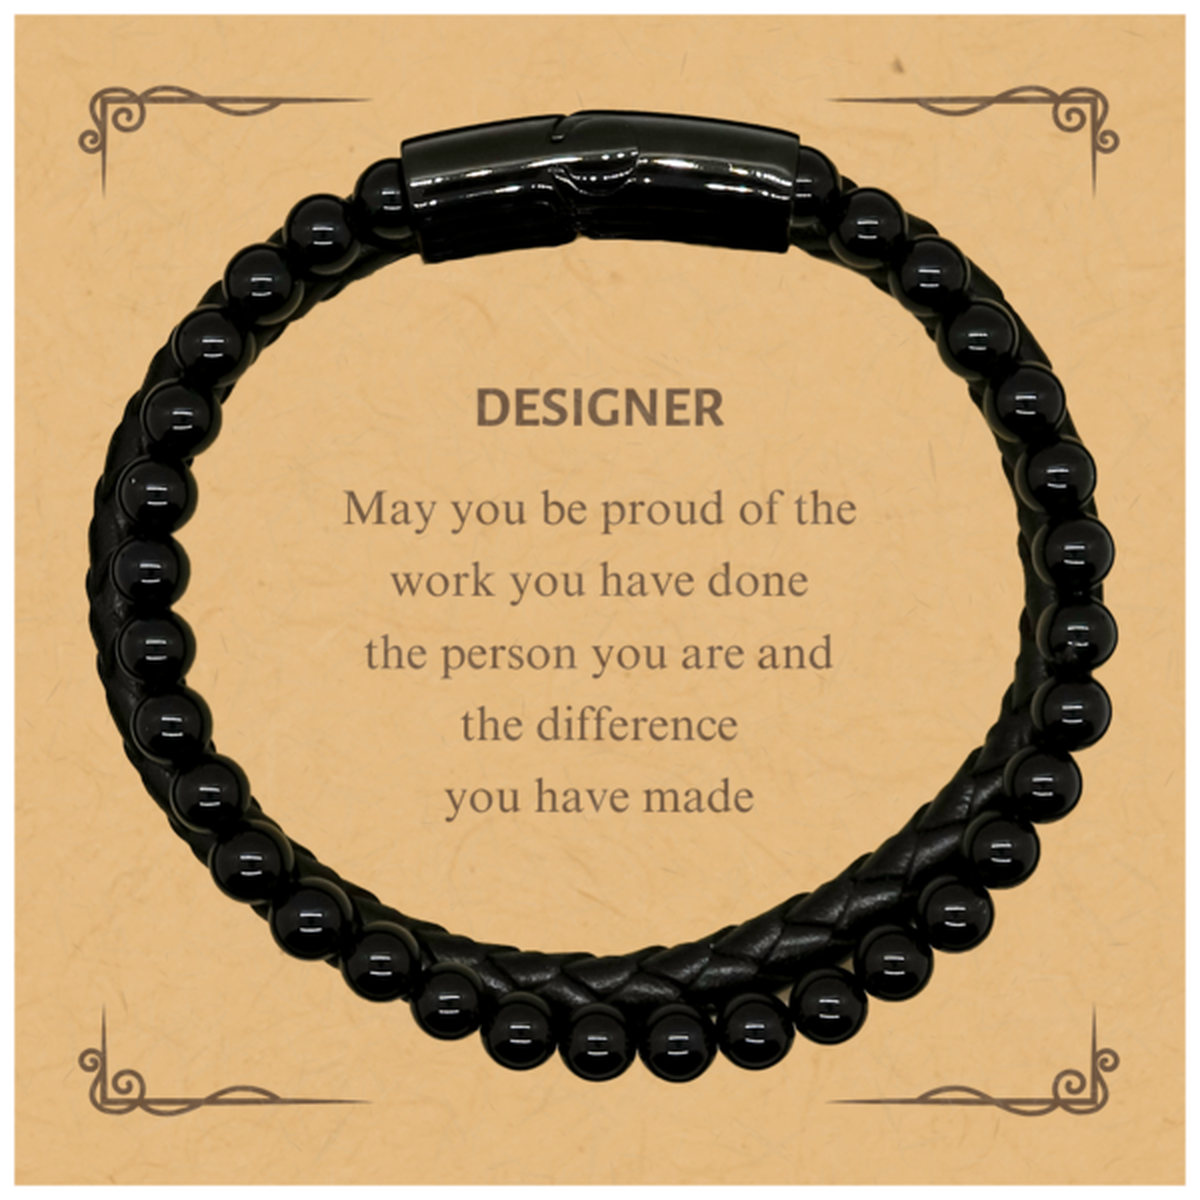 Designer May you be proud of the work you have done, Retirement Designer Stone Leather Bracelets for Colleague Appreciation Gifts Amazing for Designer